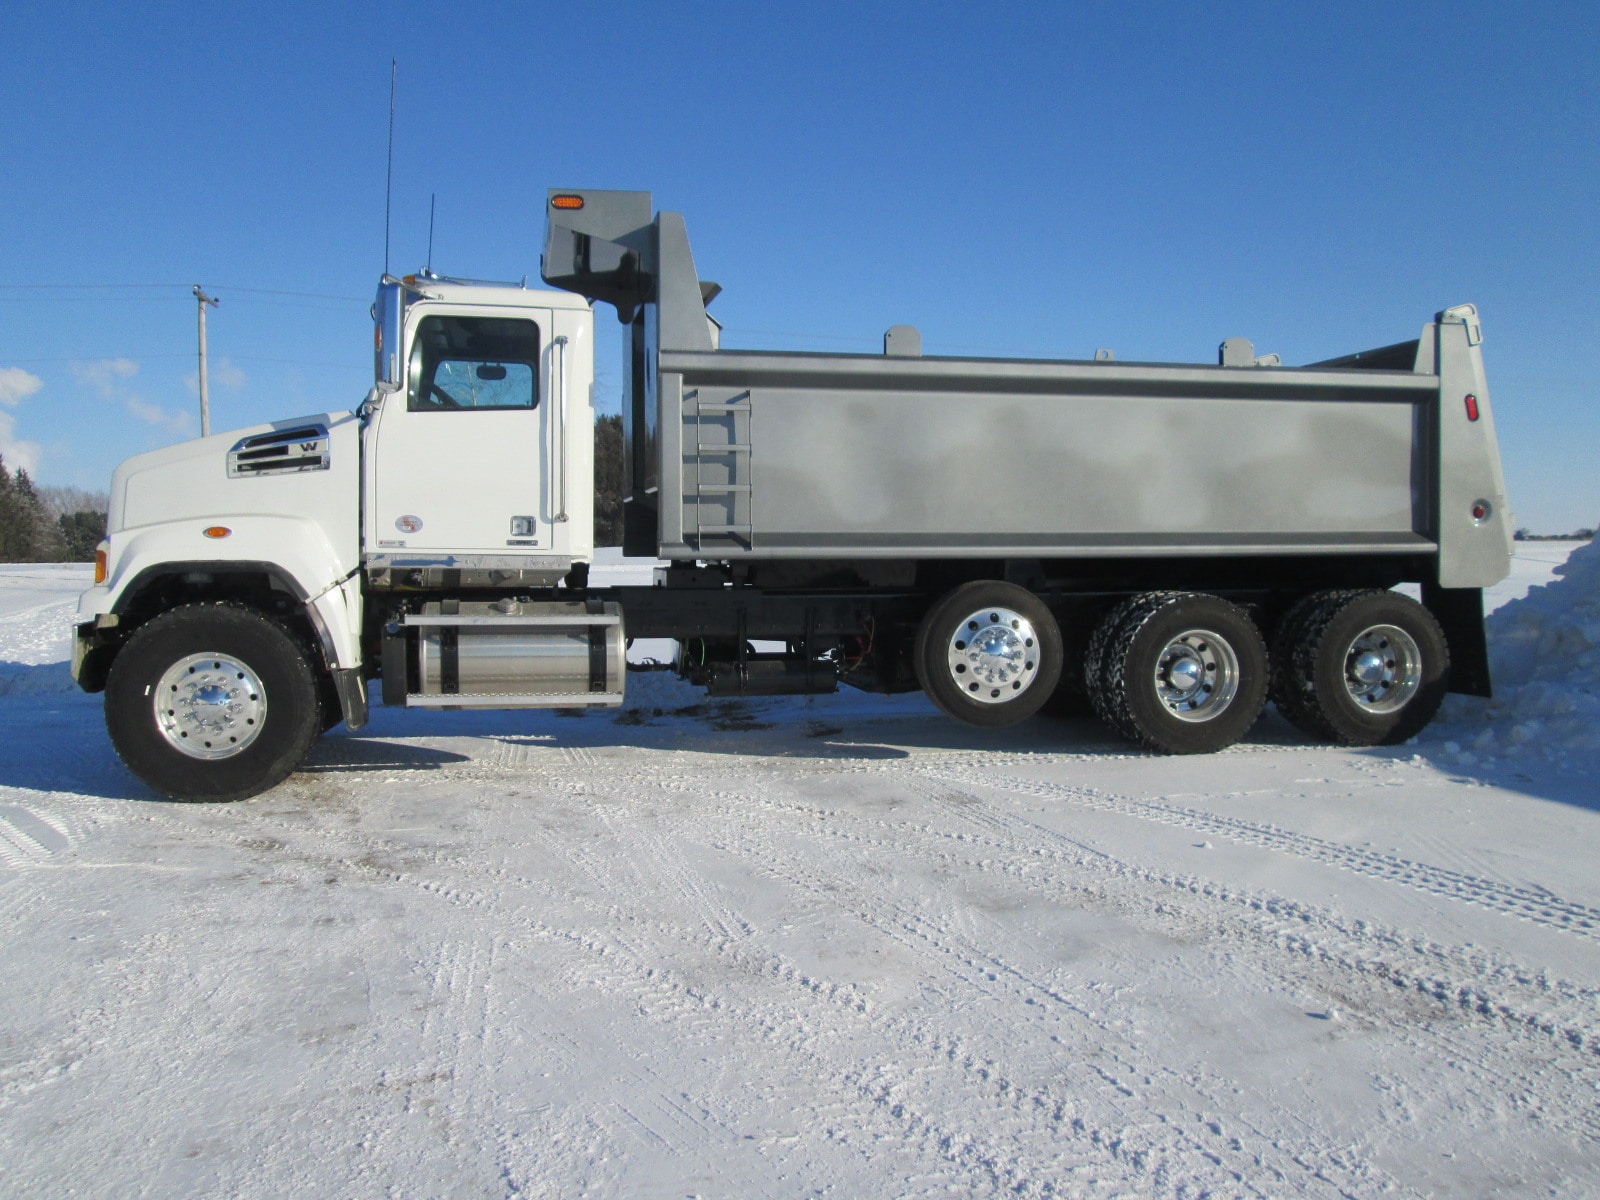 Images of trucks we have completed